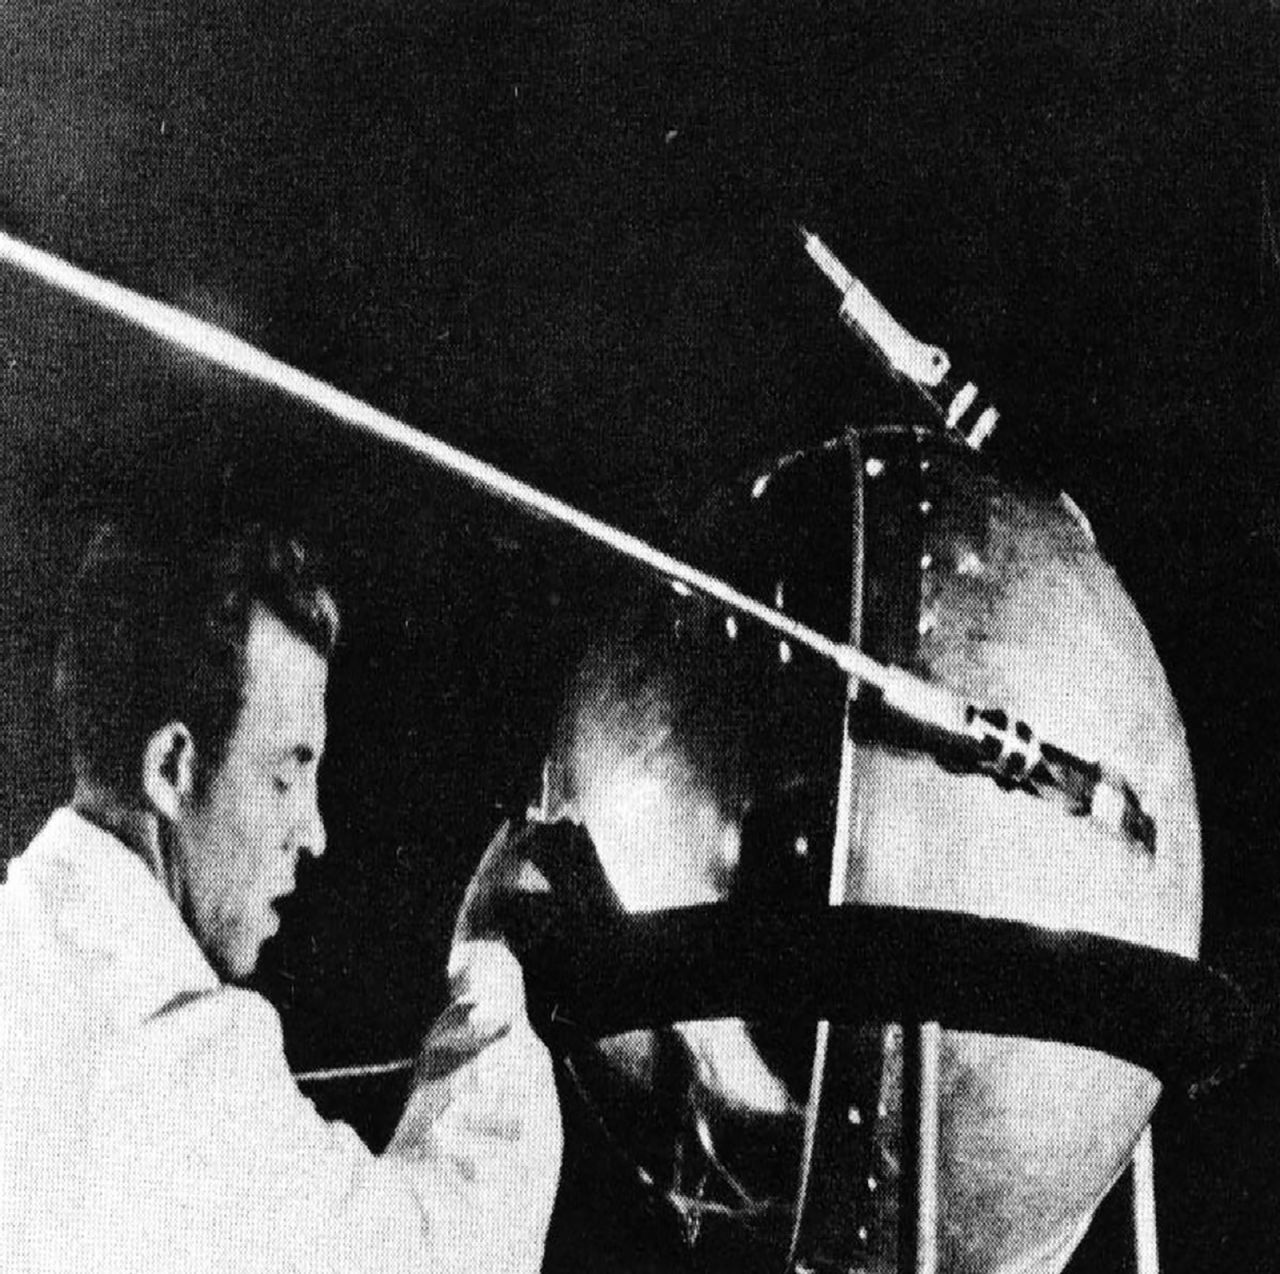 <strong>1957: </strong>The Soviet Union won the first leg of the space race, launching its intercontinental ballistic missile, the R-7, on October 4. This put <a href="https://www.britannica.com/science/space-exploration/From-Sputnik-to-Apollo" target="_blank" target="_blank">Sputnik</a> -- the world's first artificial satellite -- into orbit. The following month, a second satellite, Sputnik 2, was sent into space carrying a small dog called <a href="https://www.britannica.com/topic/Laika" target="_blank" target="_blank">Laika</a>, the first living creature in orbit. While she did not survive the mission, she blazed the way for all humans that followed.<br />